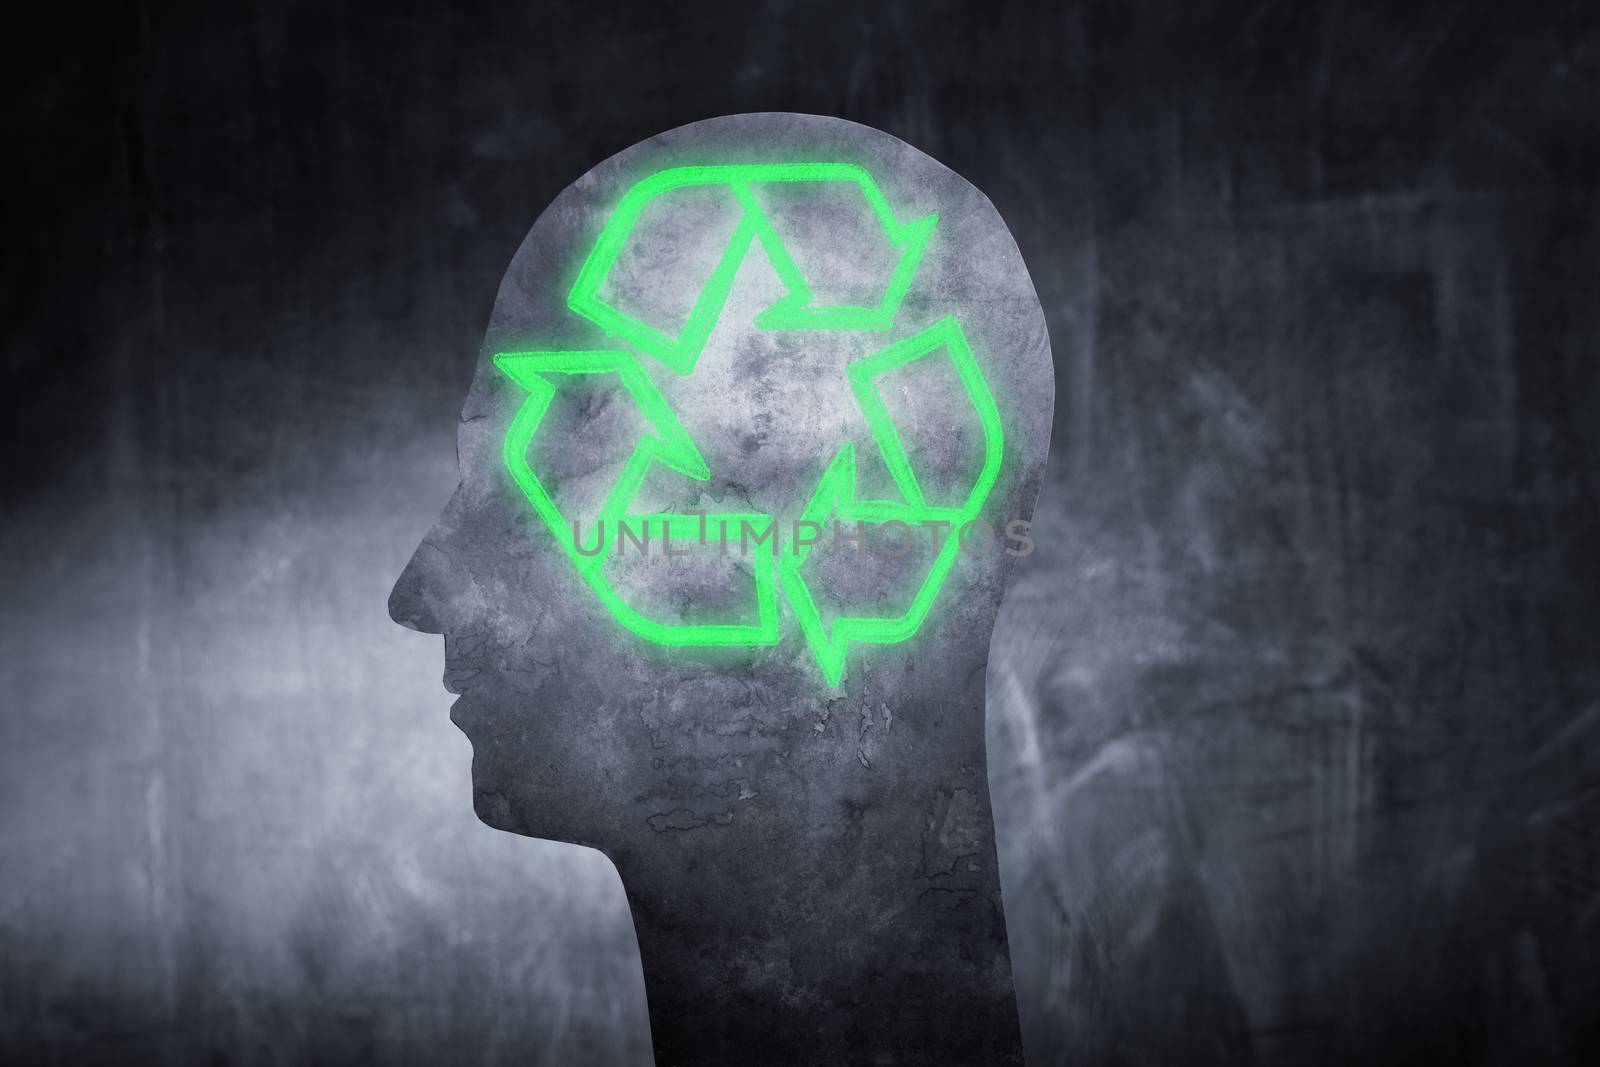 Conceptual image of a human head with a glowing universal recycling symbol.